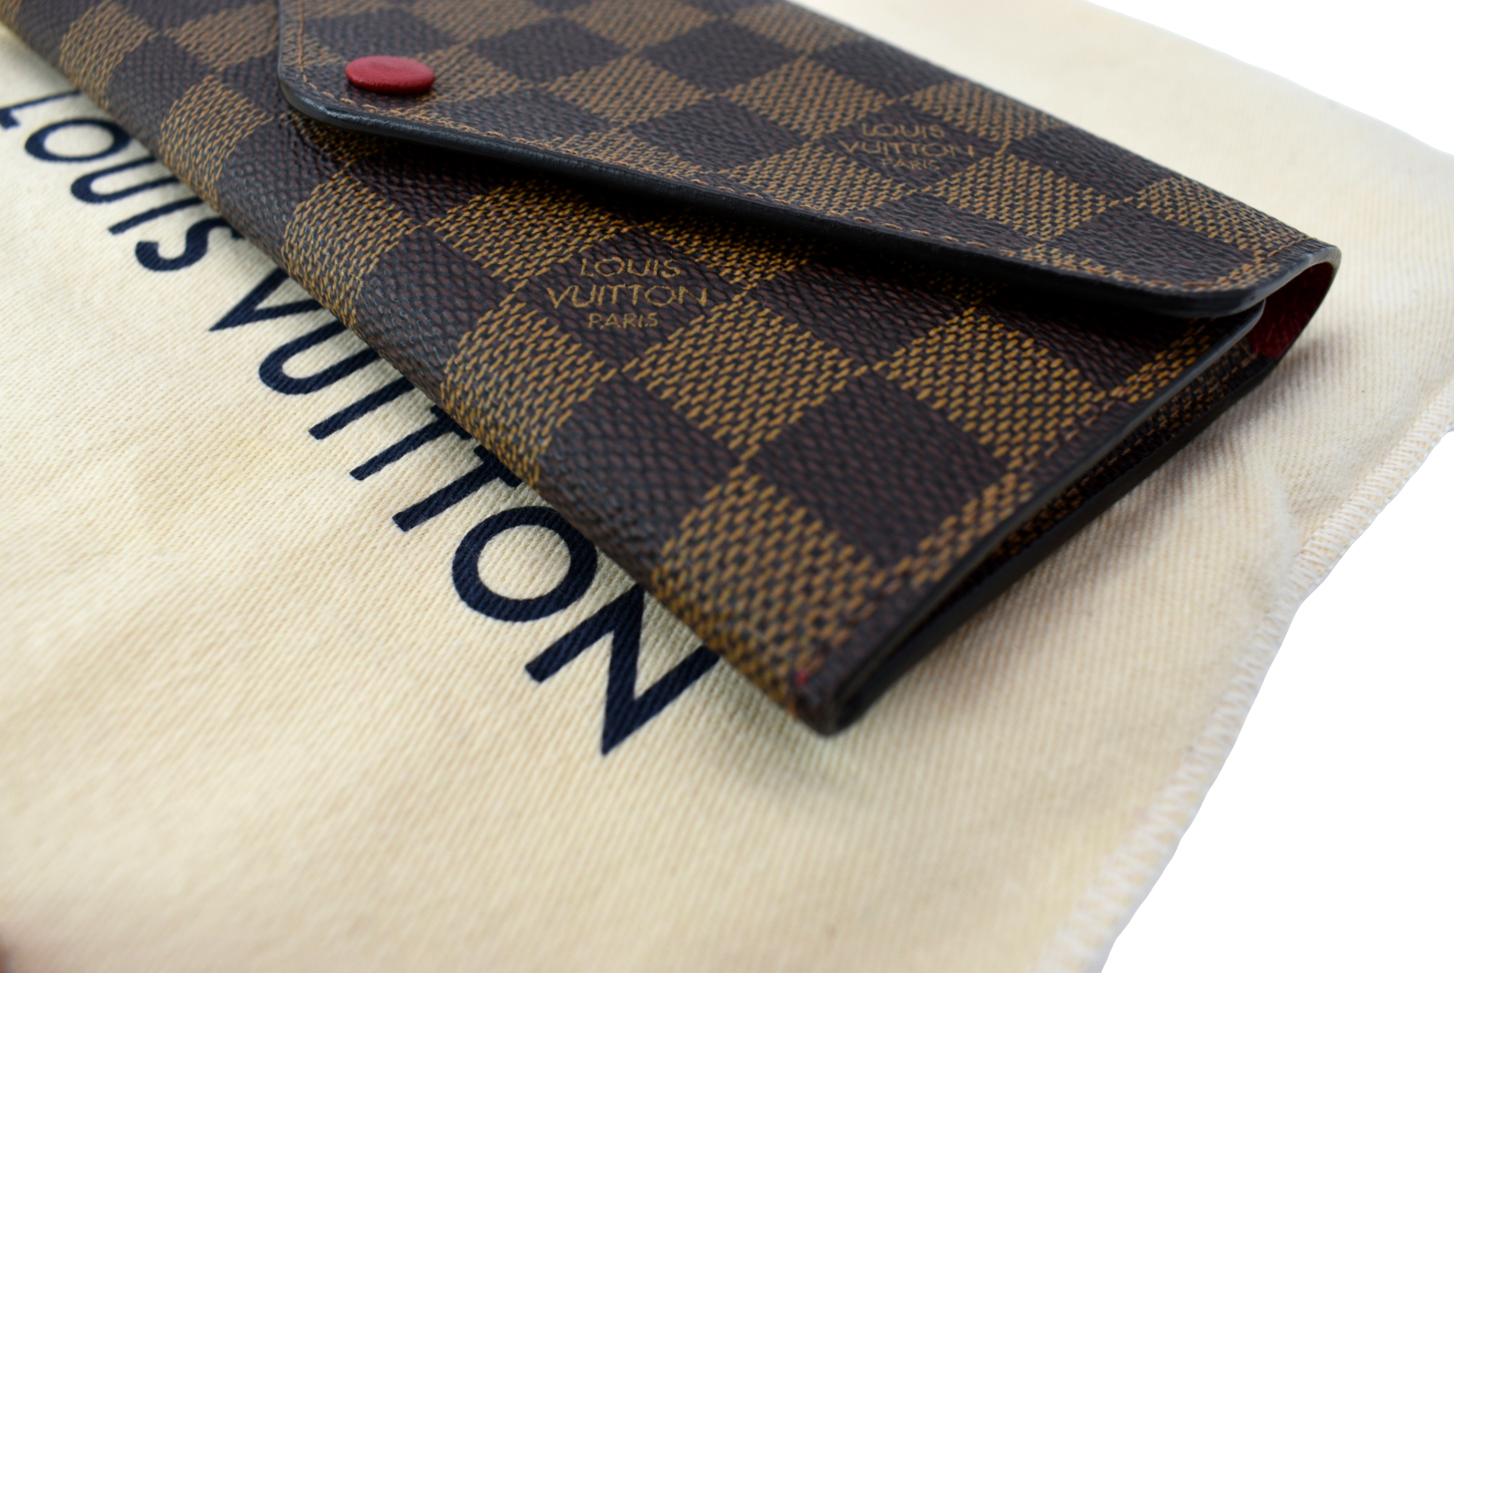 Designer Luxury Consignment on Instagram: ✨LOUIS VUITTON✨ Josephine Wallet  Selling $600 Discontinued in Damier Ebene Comes with a removable coin purse  Good condition Full set